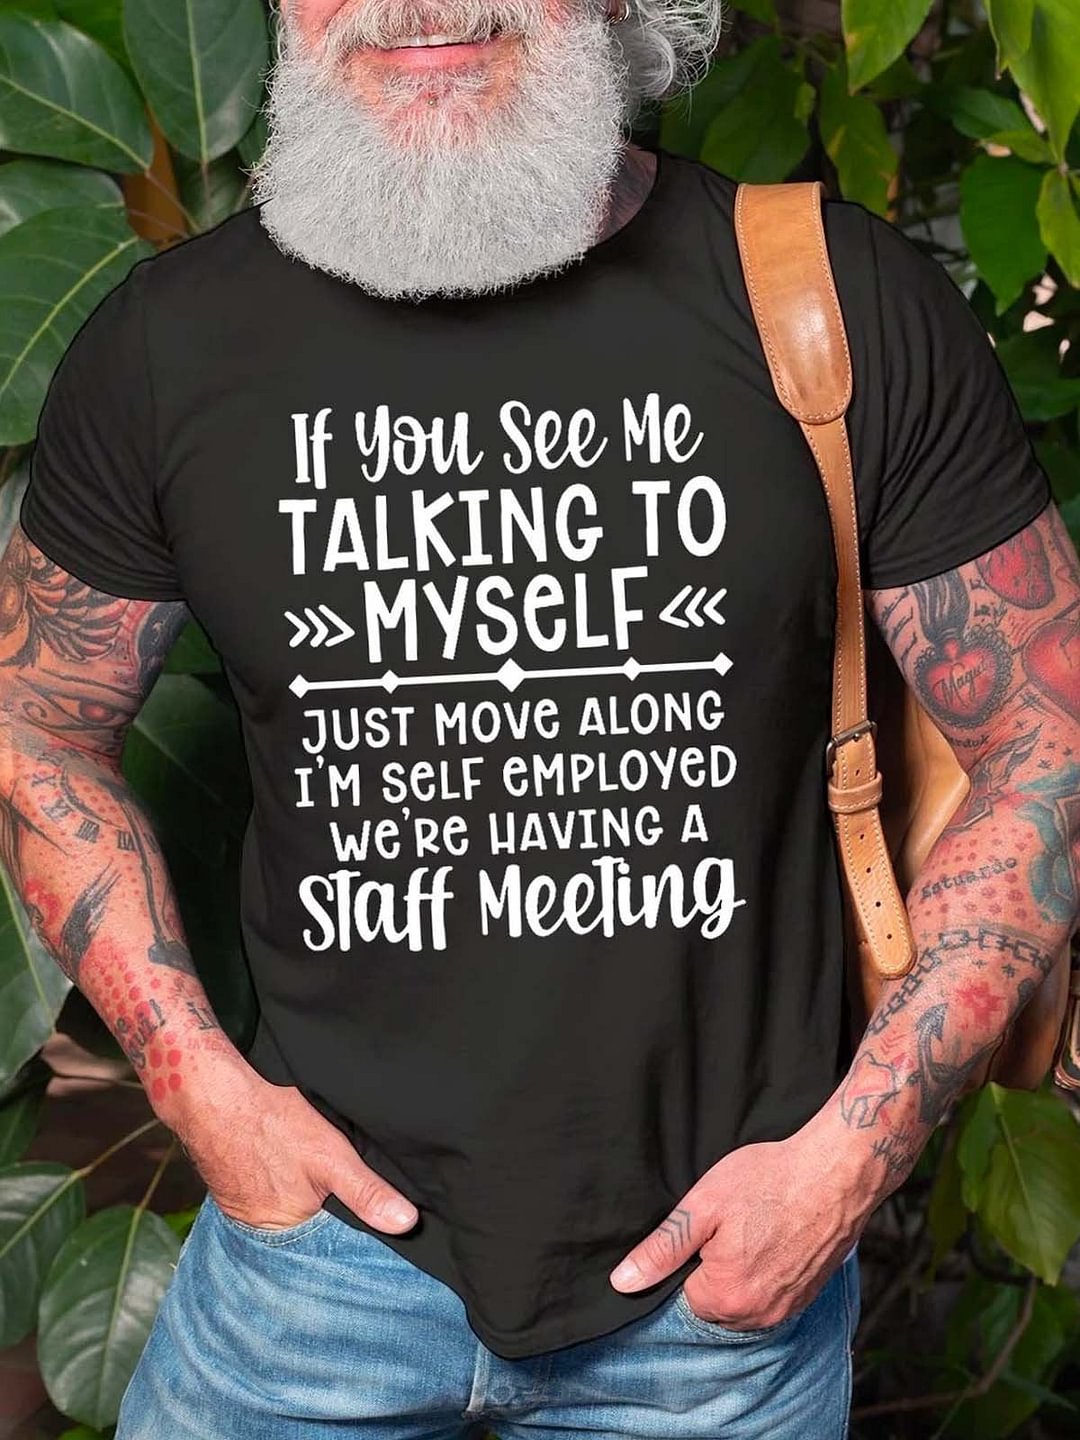 If You See Me Talking To Myself Just Move Alone I'm Self Employed We're Having A Staff Meeting Crew Neck Cotton Blends Casual T-shirt